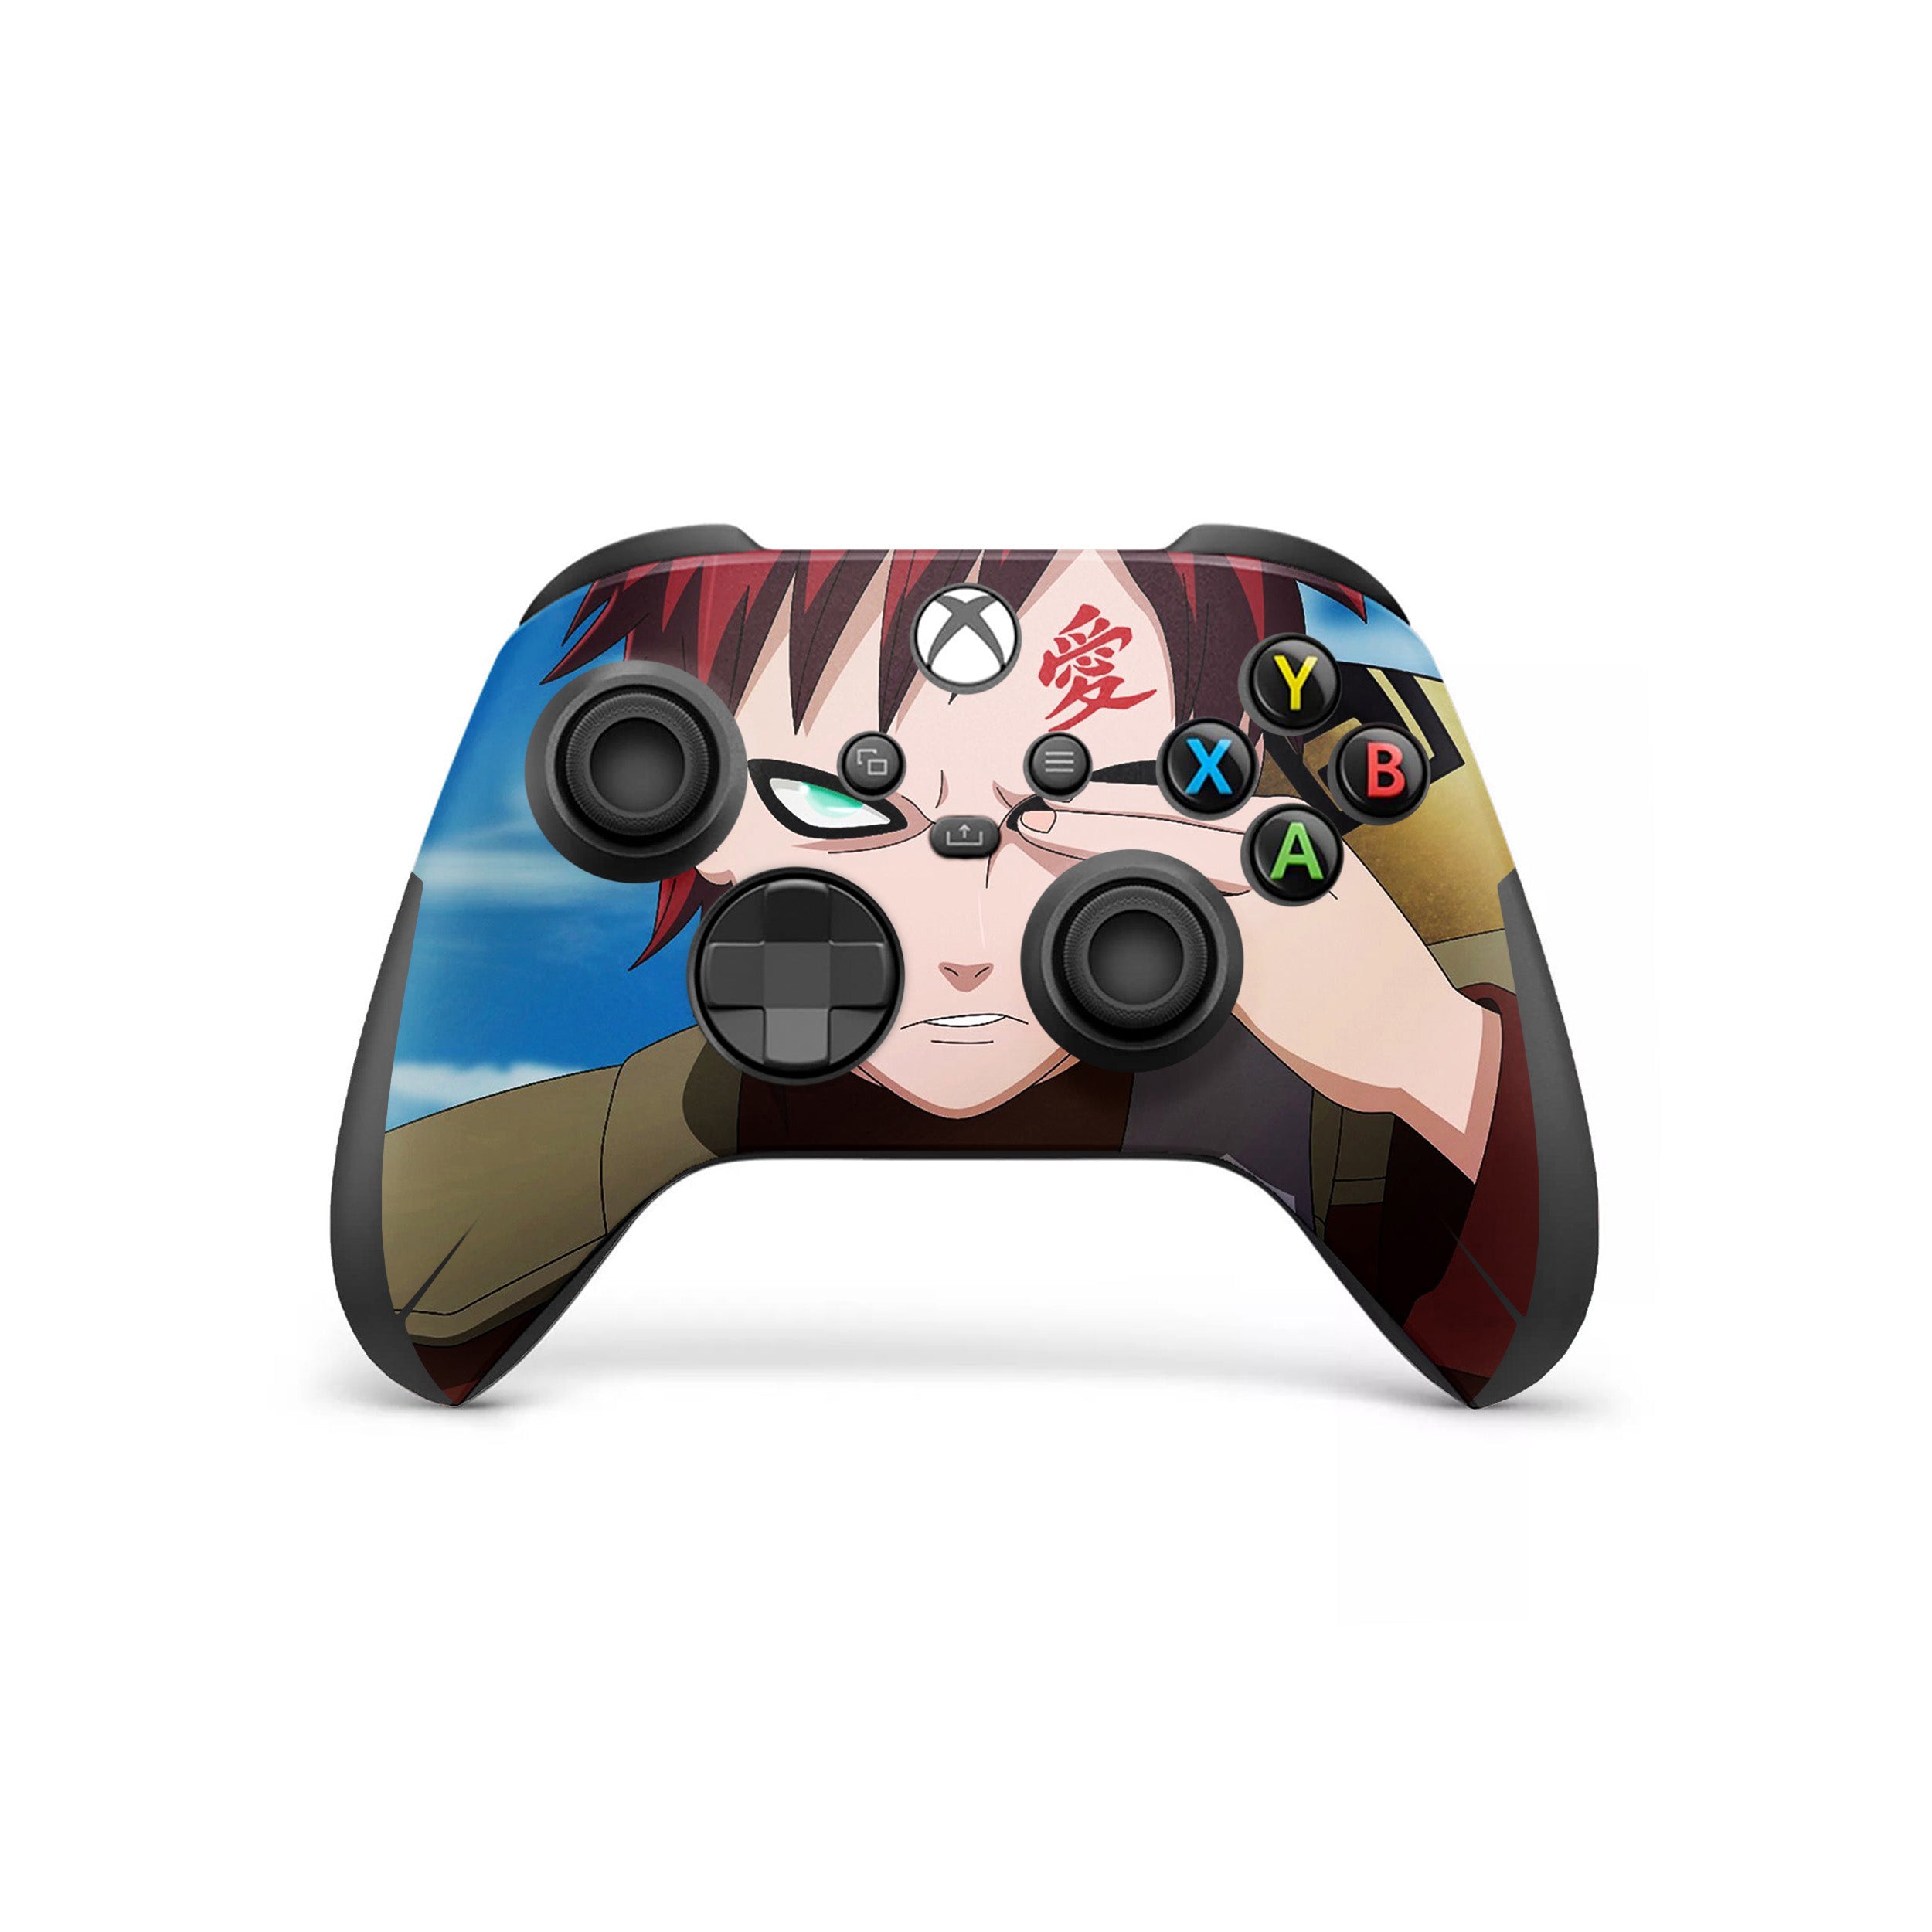 A video game skin featuring a Naruto Gaara design for the Xbox Wireless Controller.